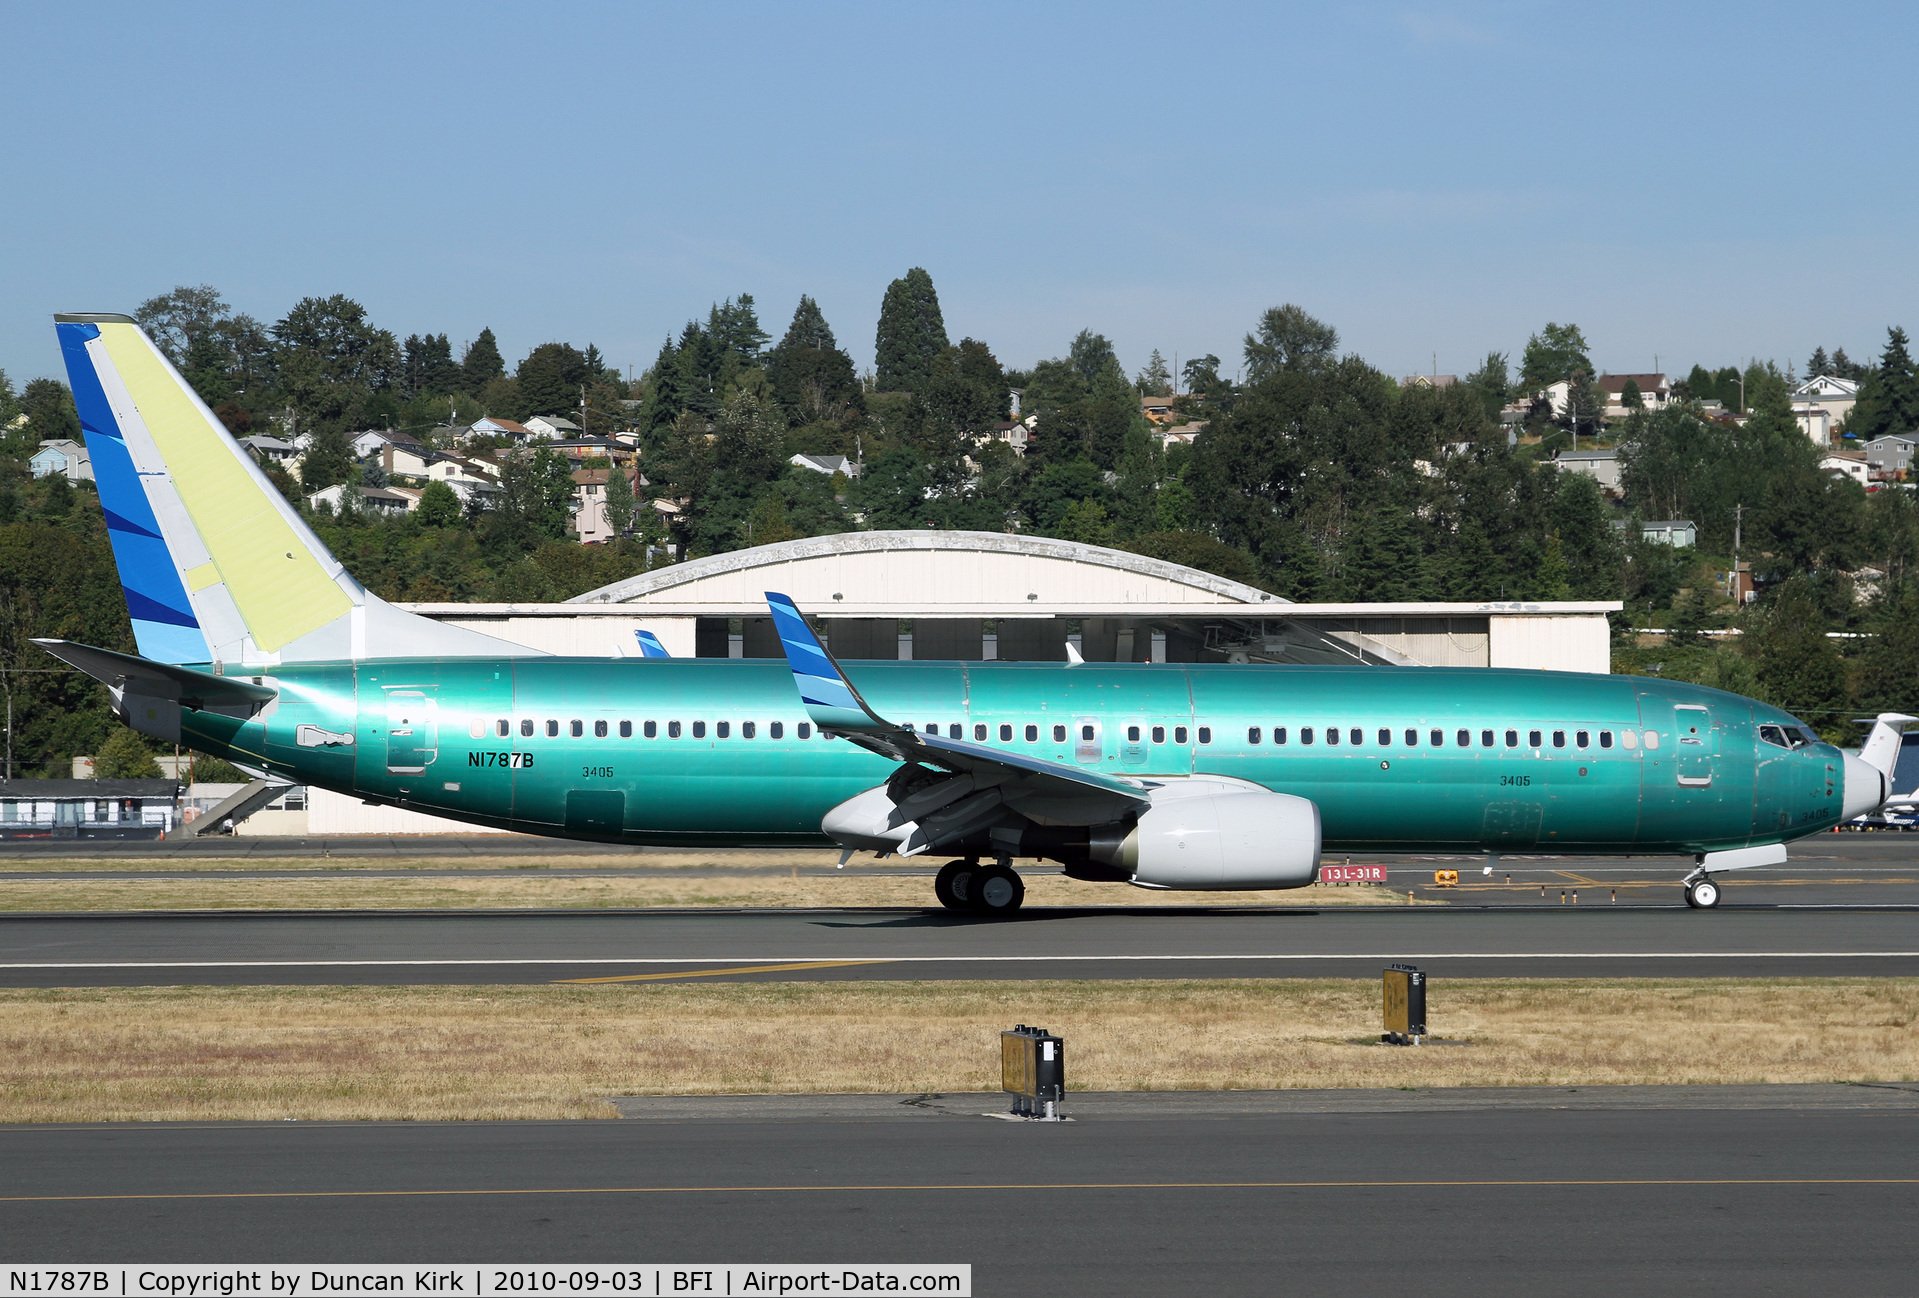 N1787B, 2010 Boeing 737-8U3 C/N 30149, B.737-8U3 c/n 30149 landing after first flight from Renton carrying N1787B